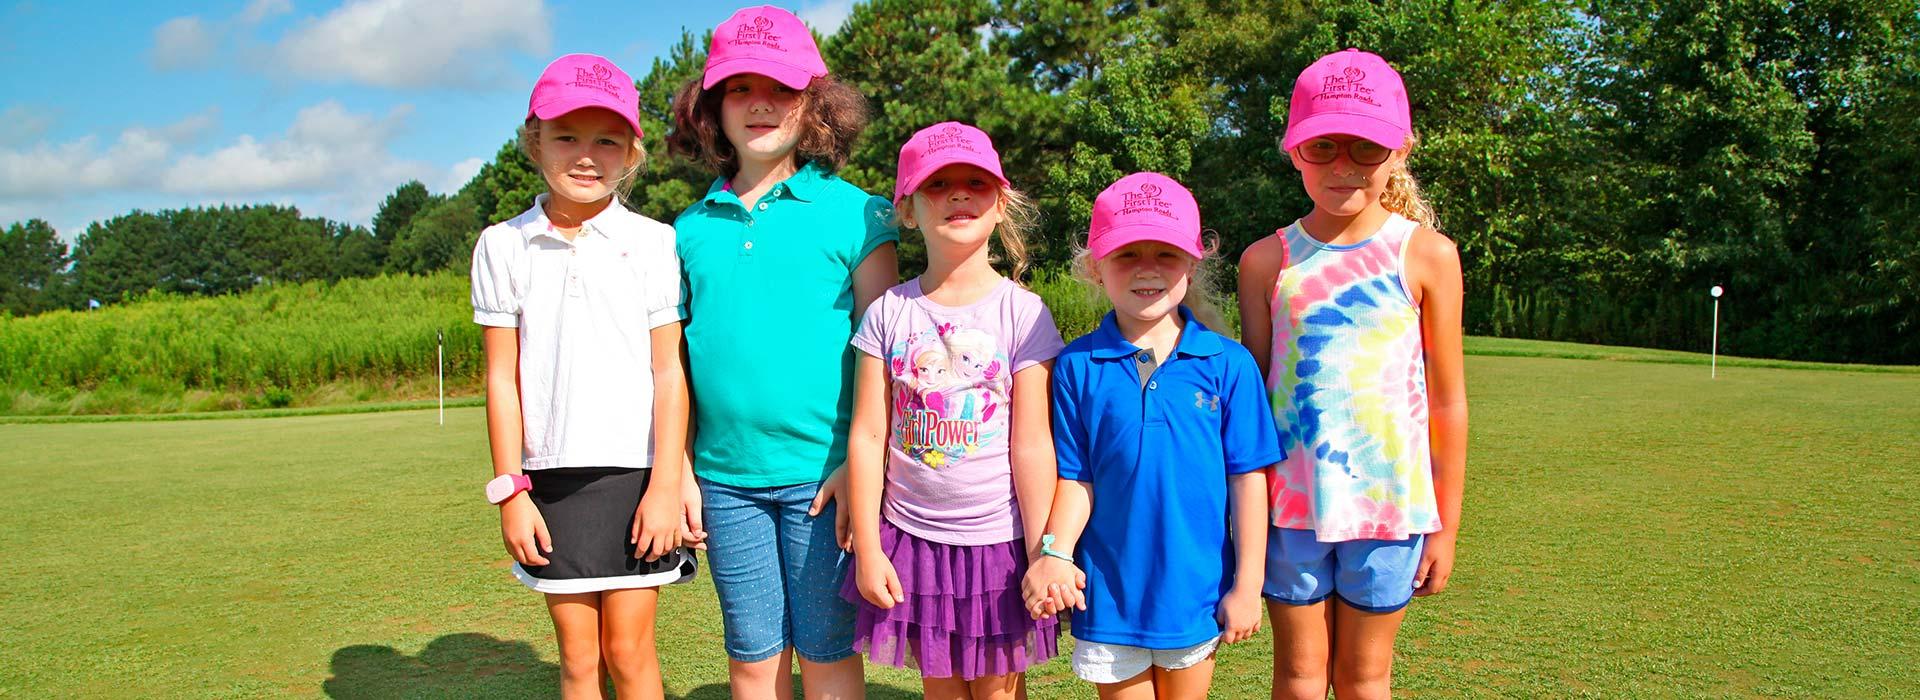 The First Tee of Hampton Roads girls standing together